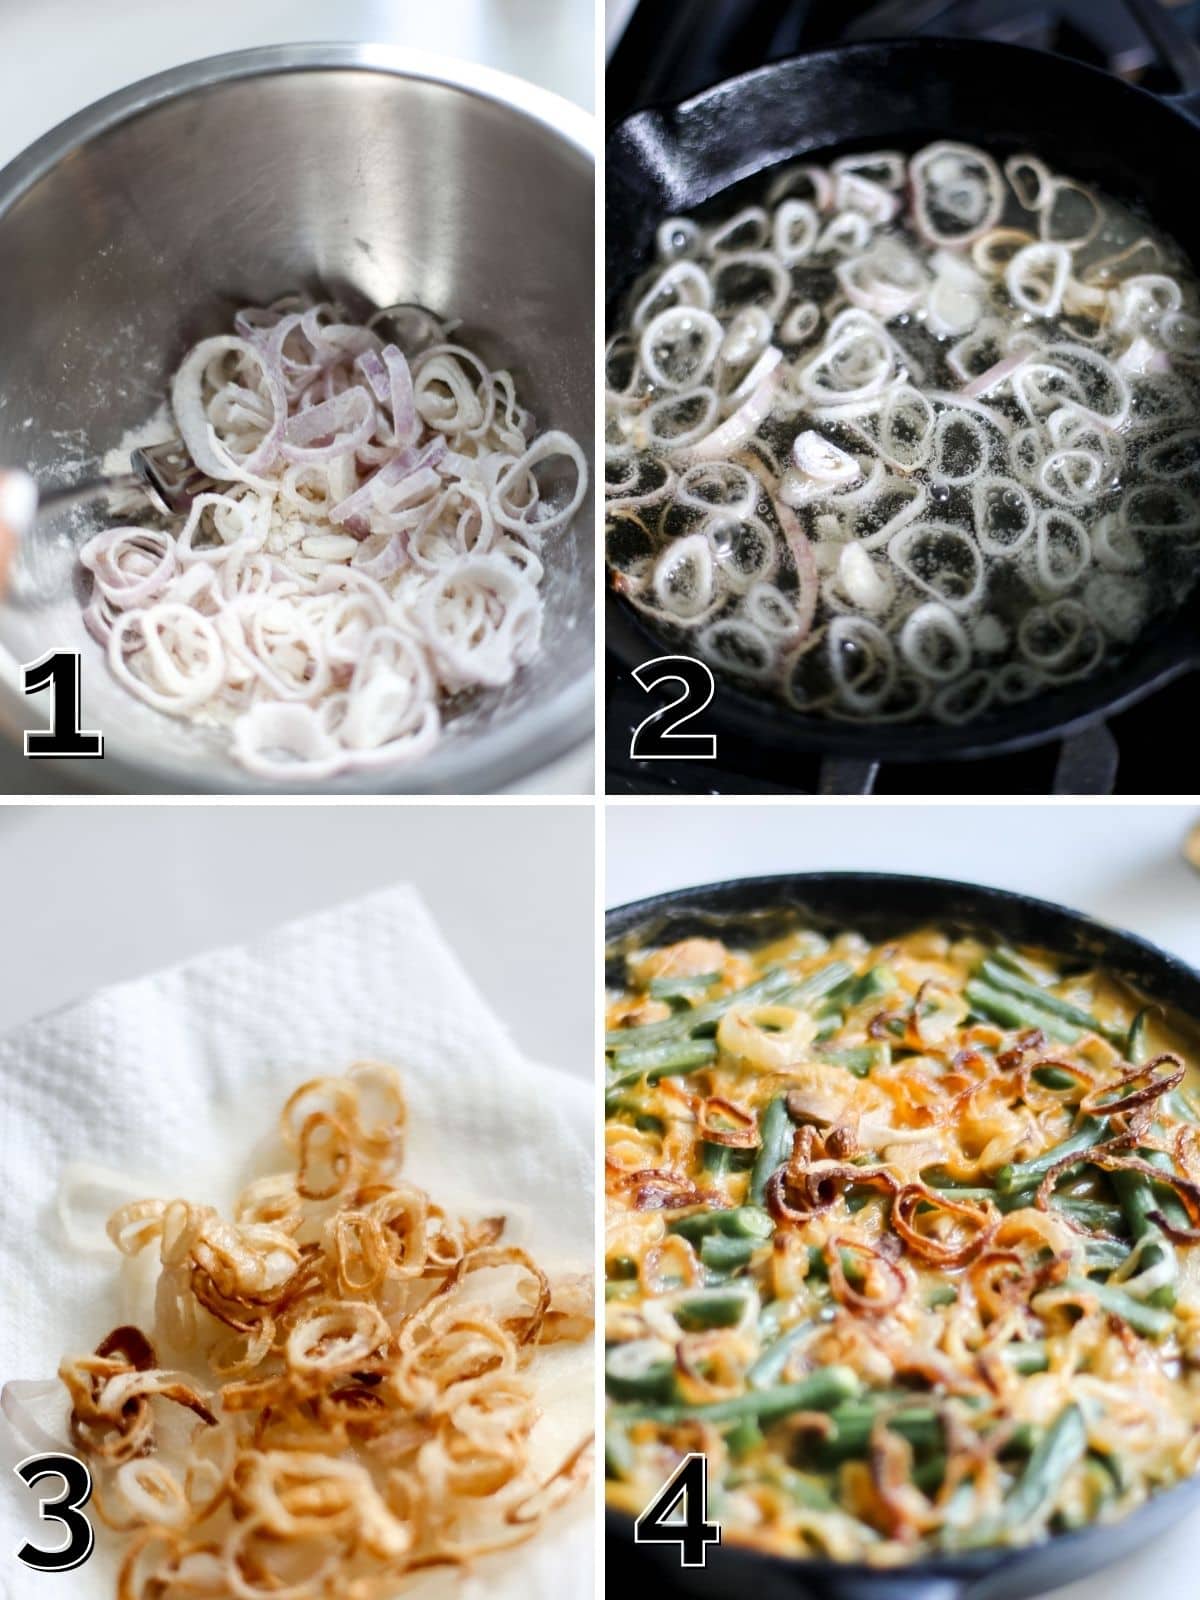 A step by step process of making fried shallots, covering in flour and frying in oil.